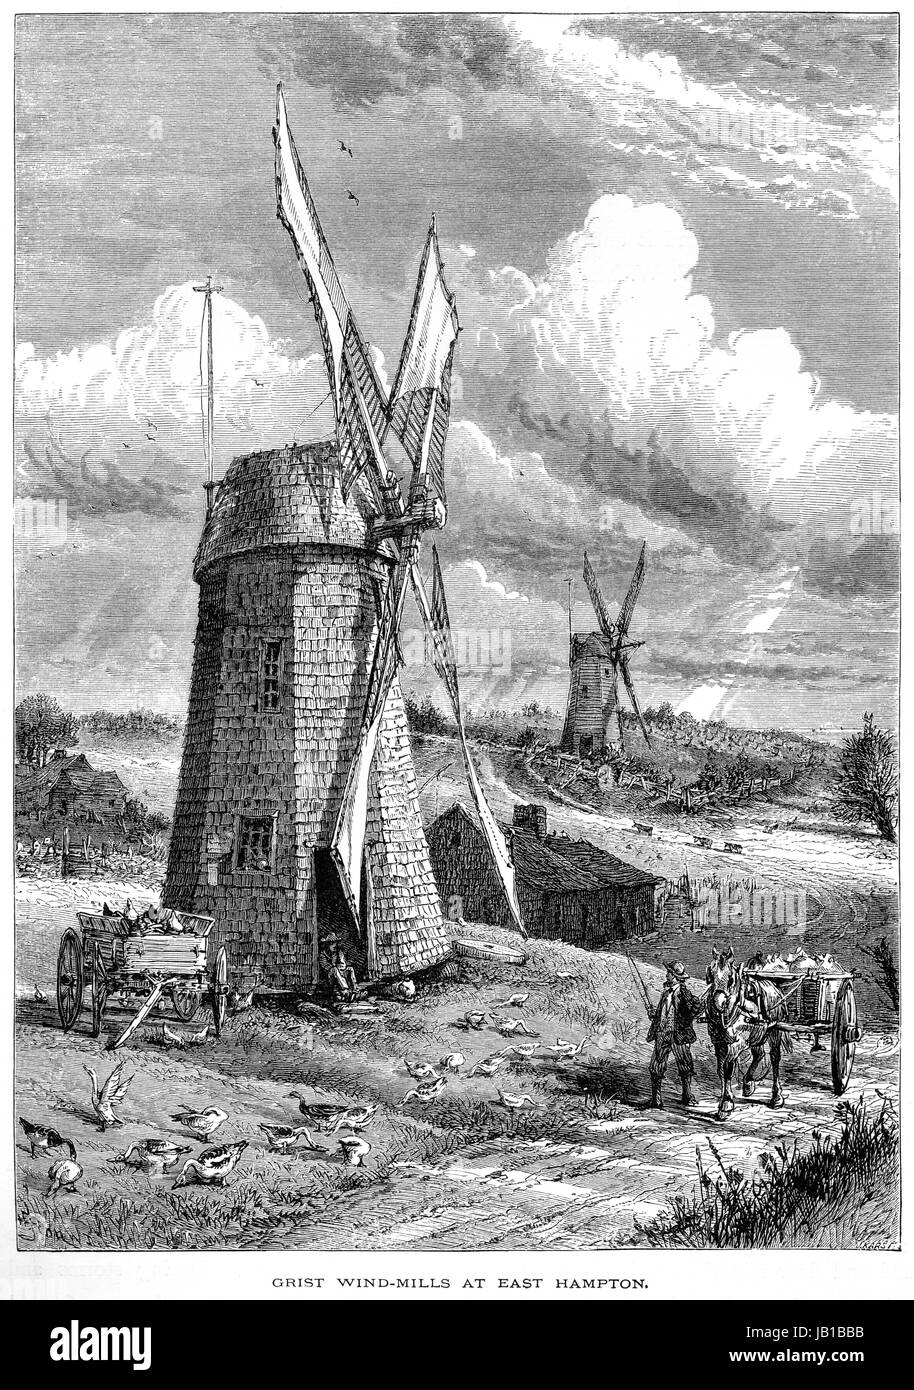 Engraving of Grist Windmills at East Hampton, Long Island, New York scanned at high resolution from a book printed in 1872.  Believed copyright free. Stock Photo